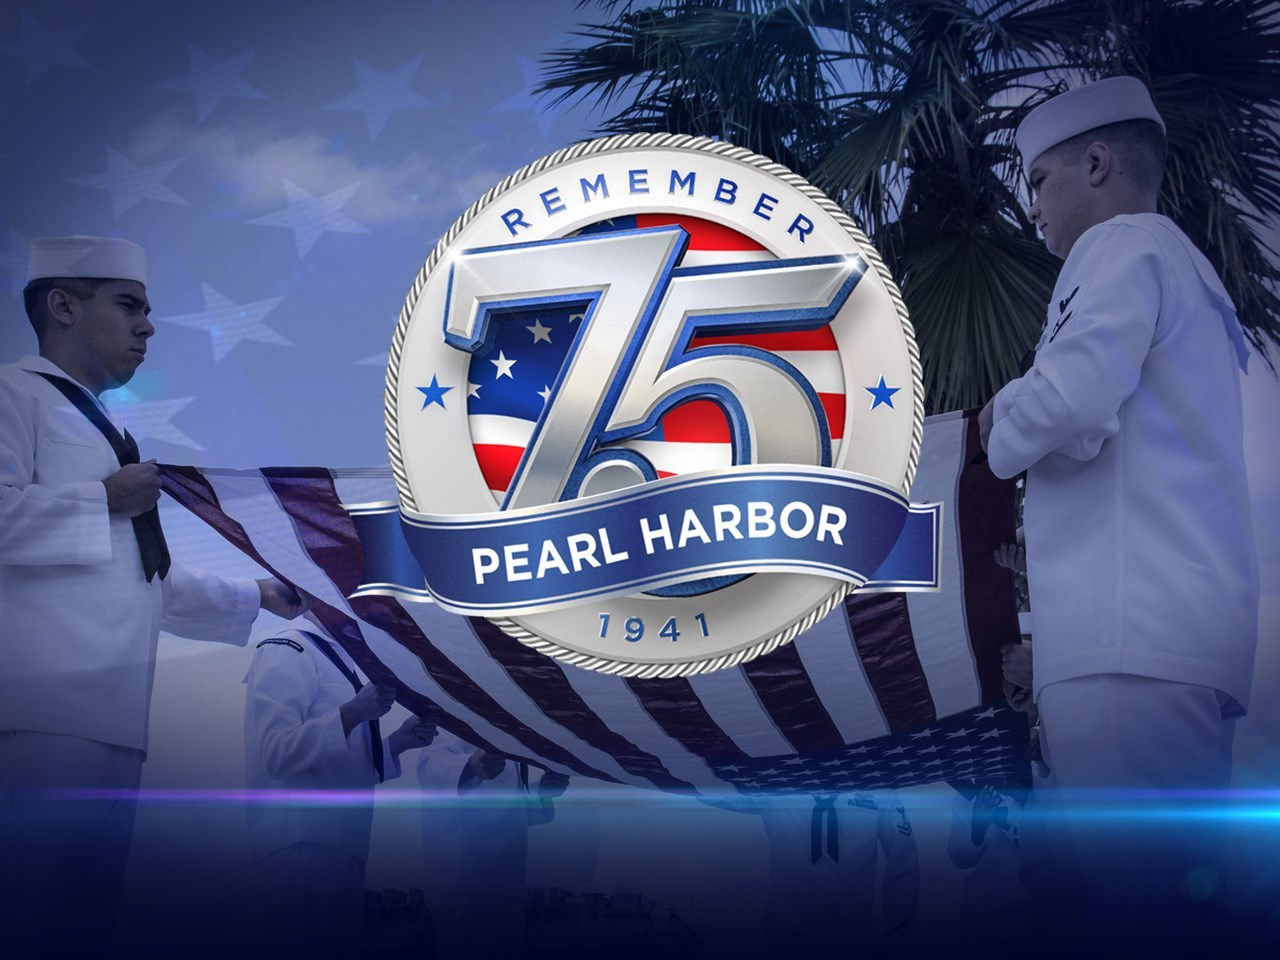 75th National Pearl Harbor Remembrance Day Celebration "A Date Which